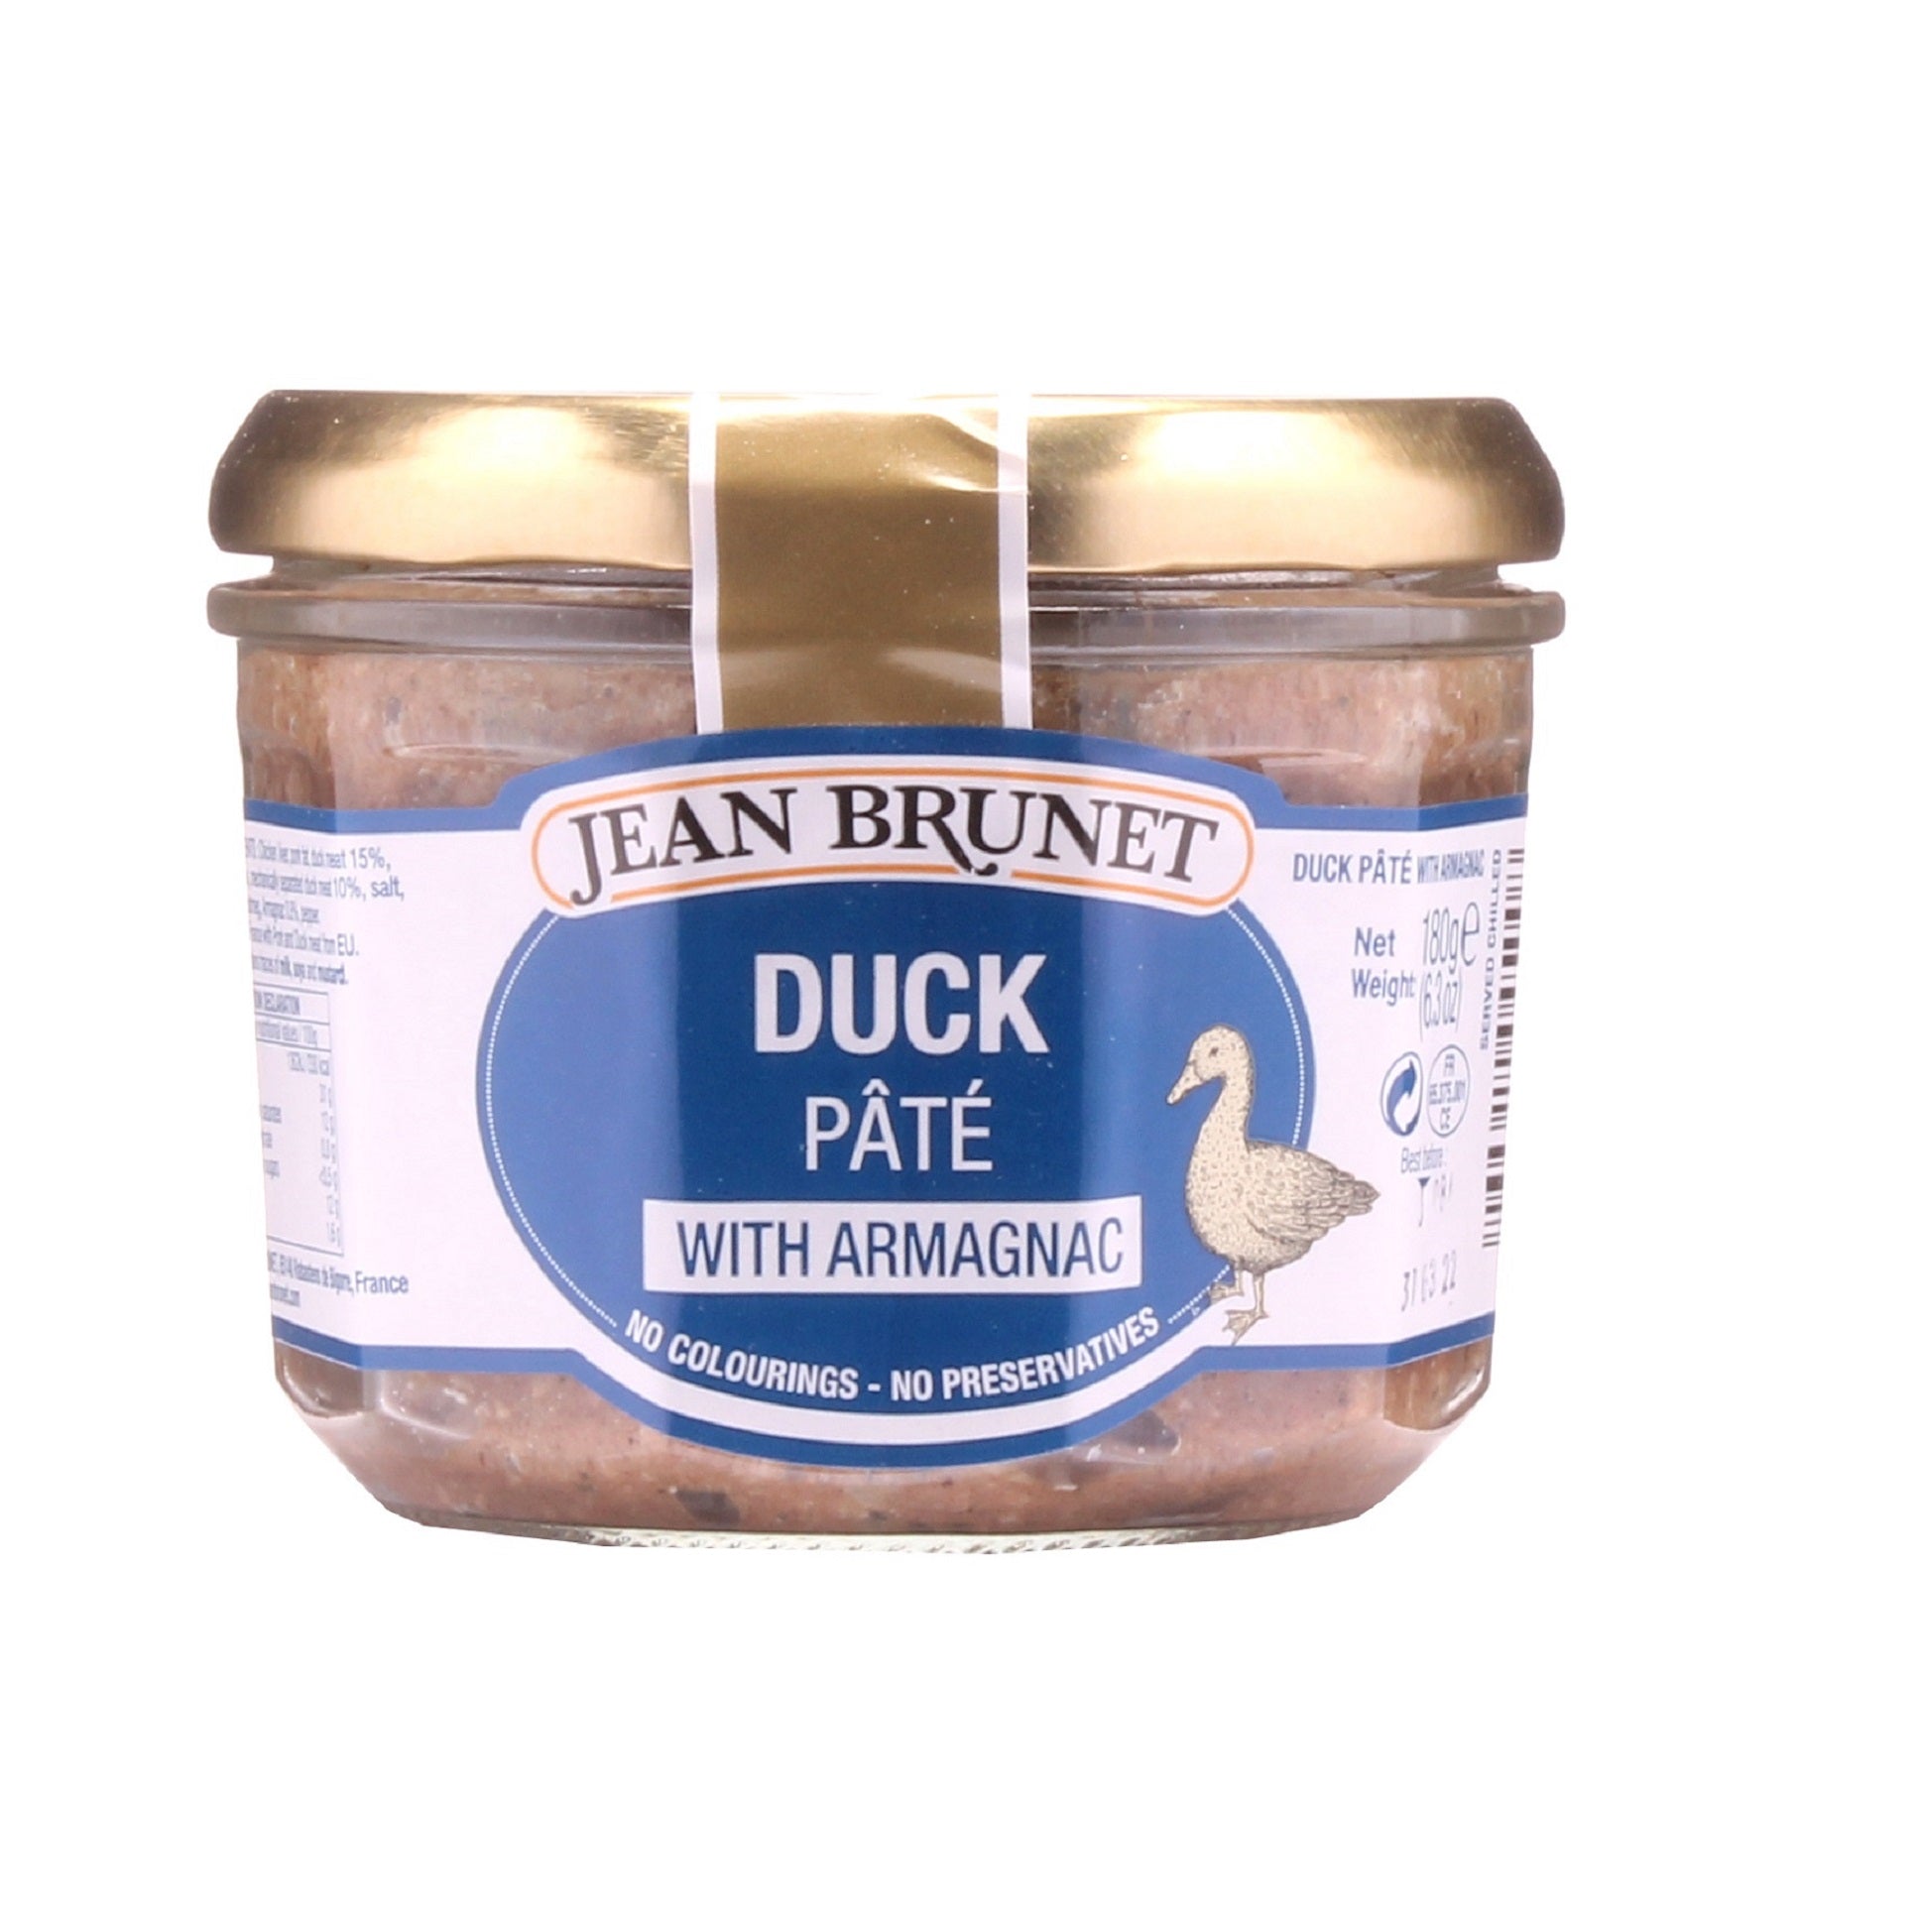 JEAN BRUNET DUCK PATE WITH ARMAGNAC (180g)